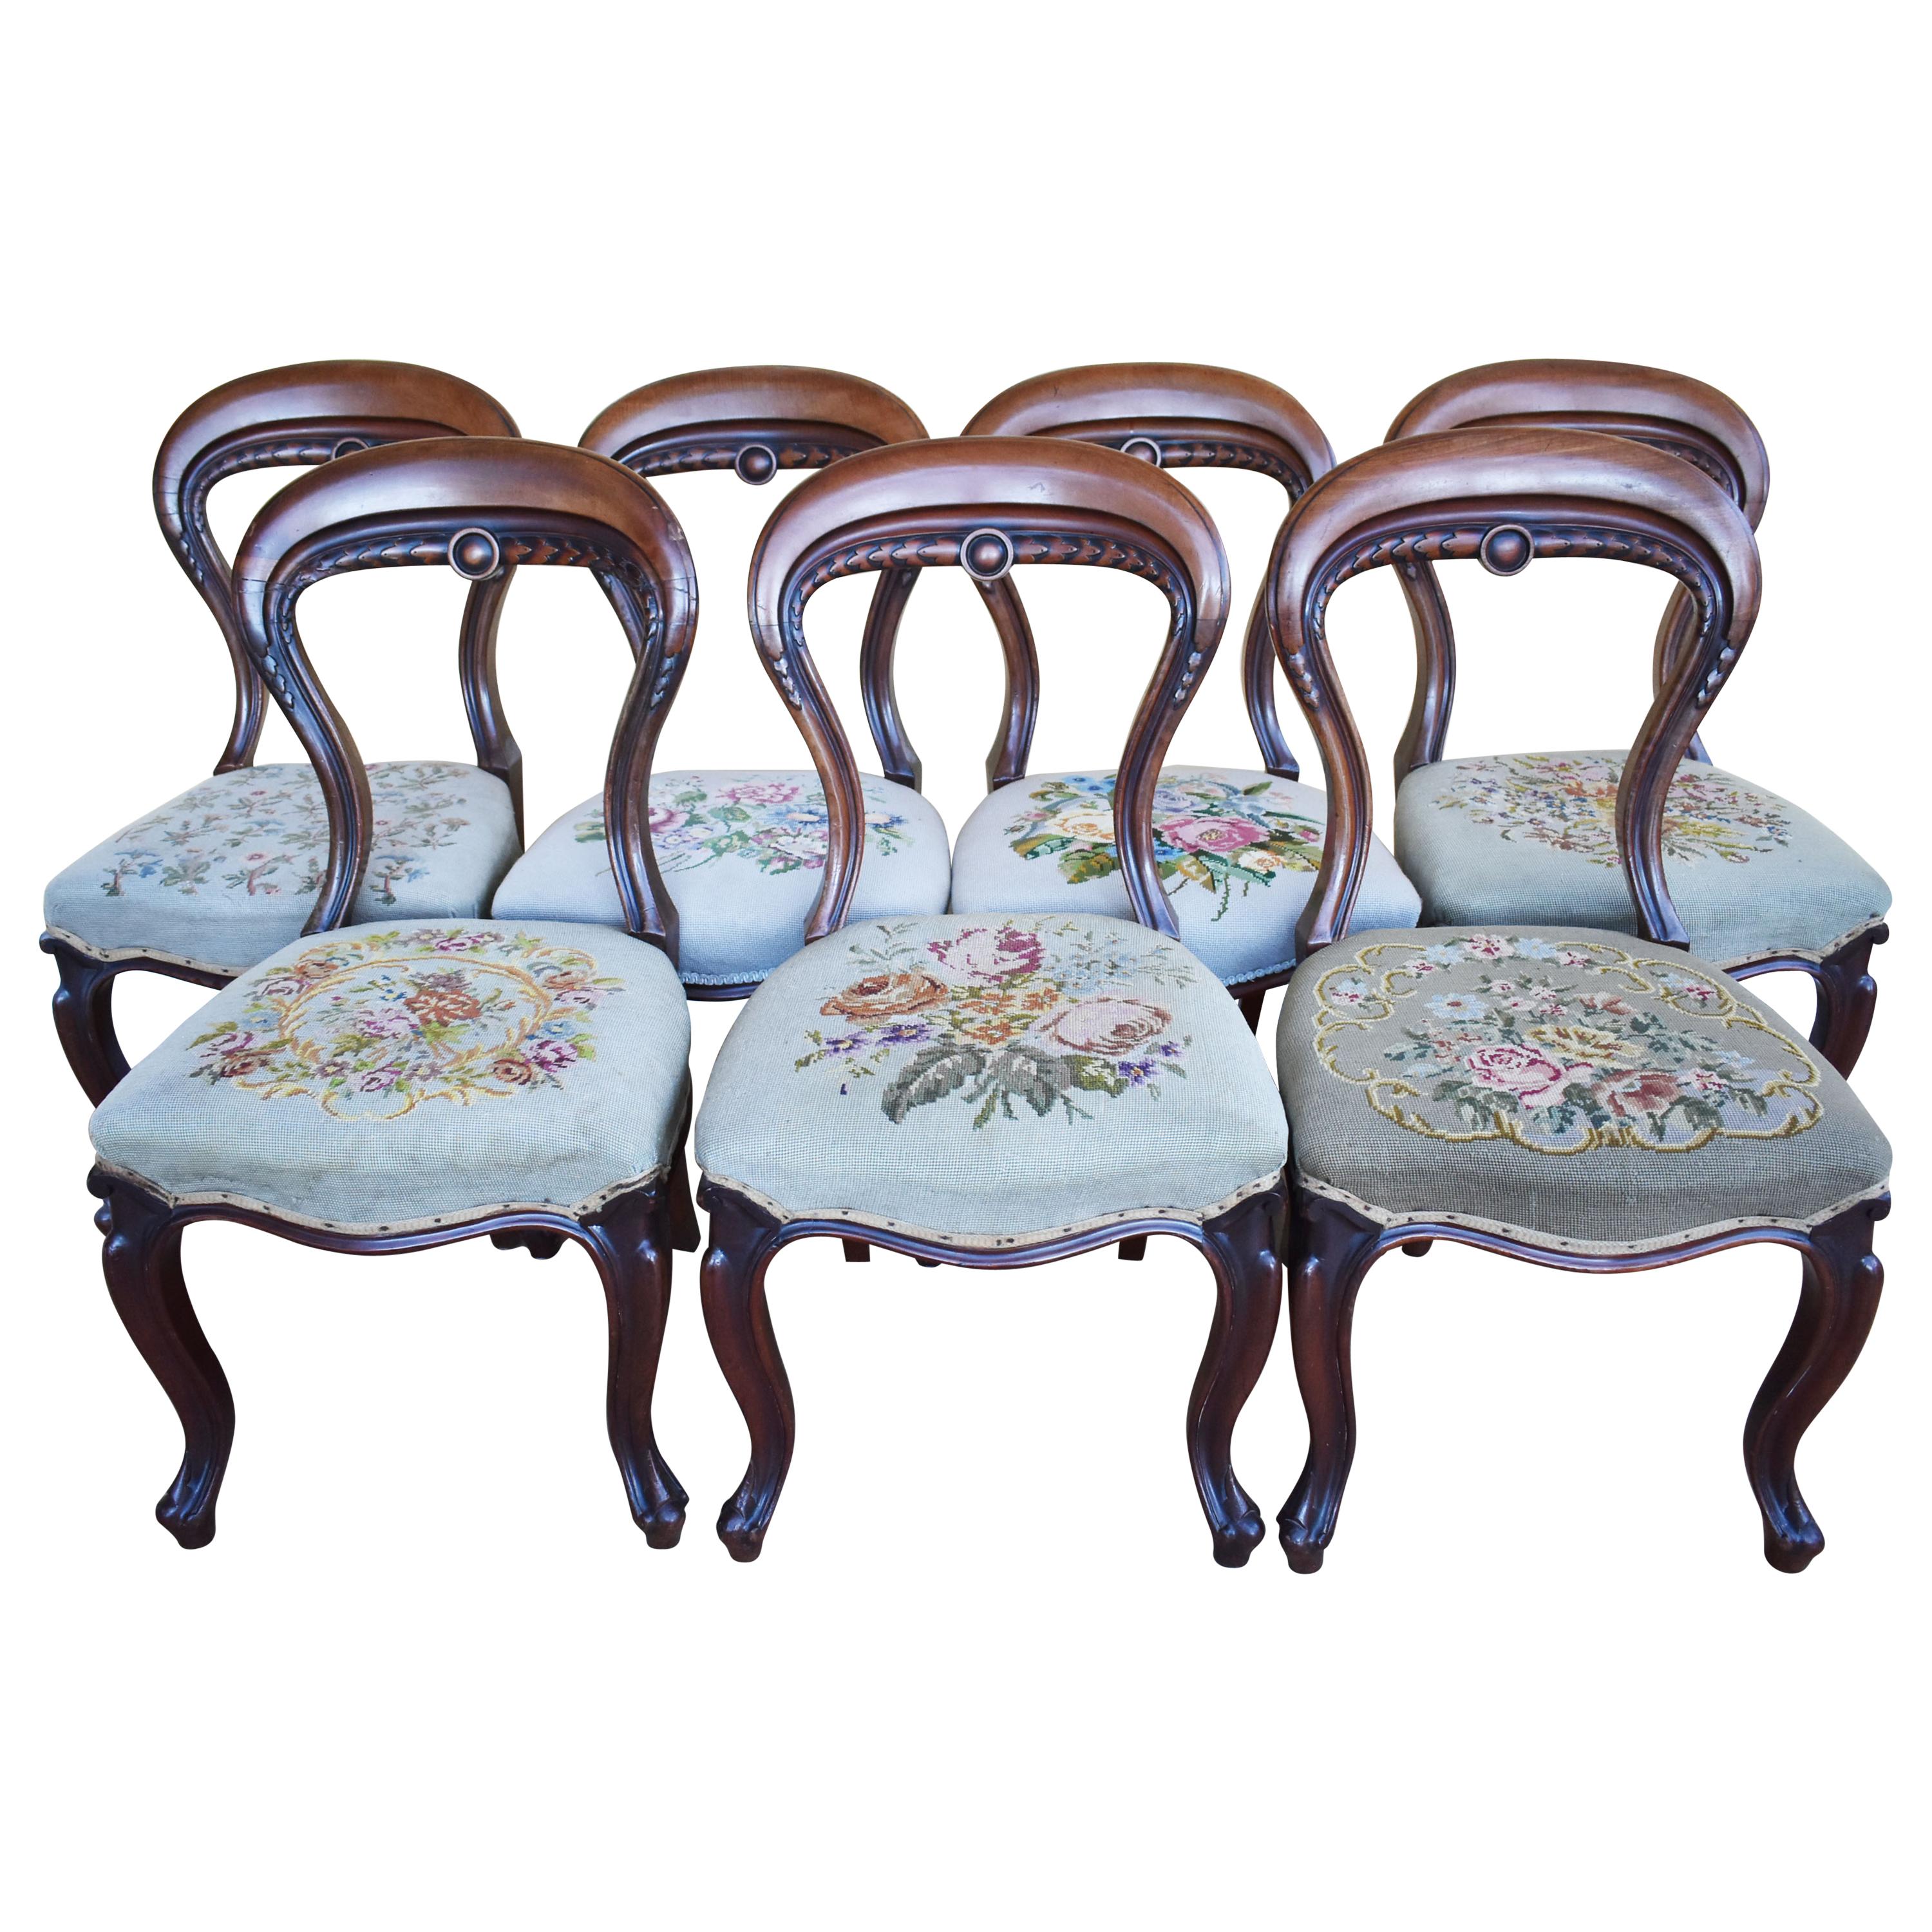 Set of 7 19th Century Victorian Walnut Dining Chairs